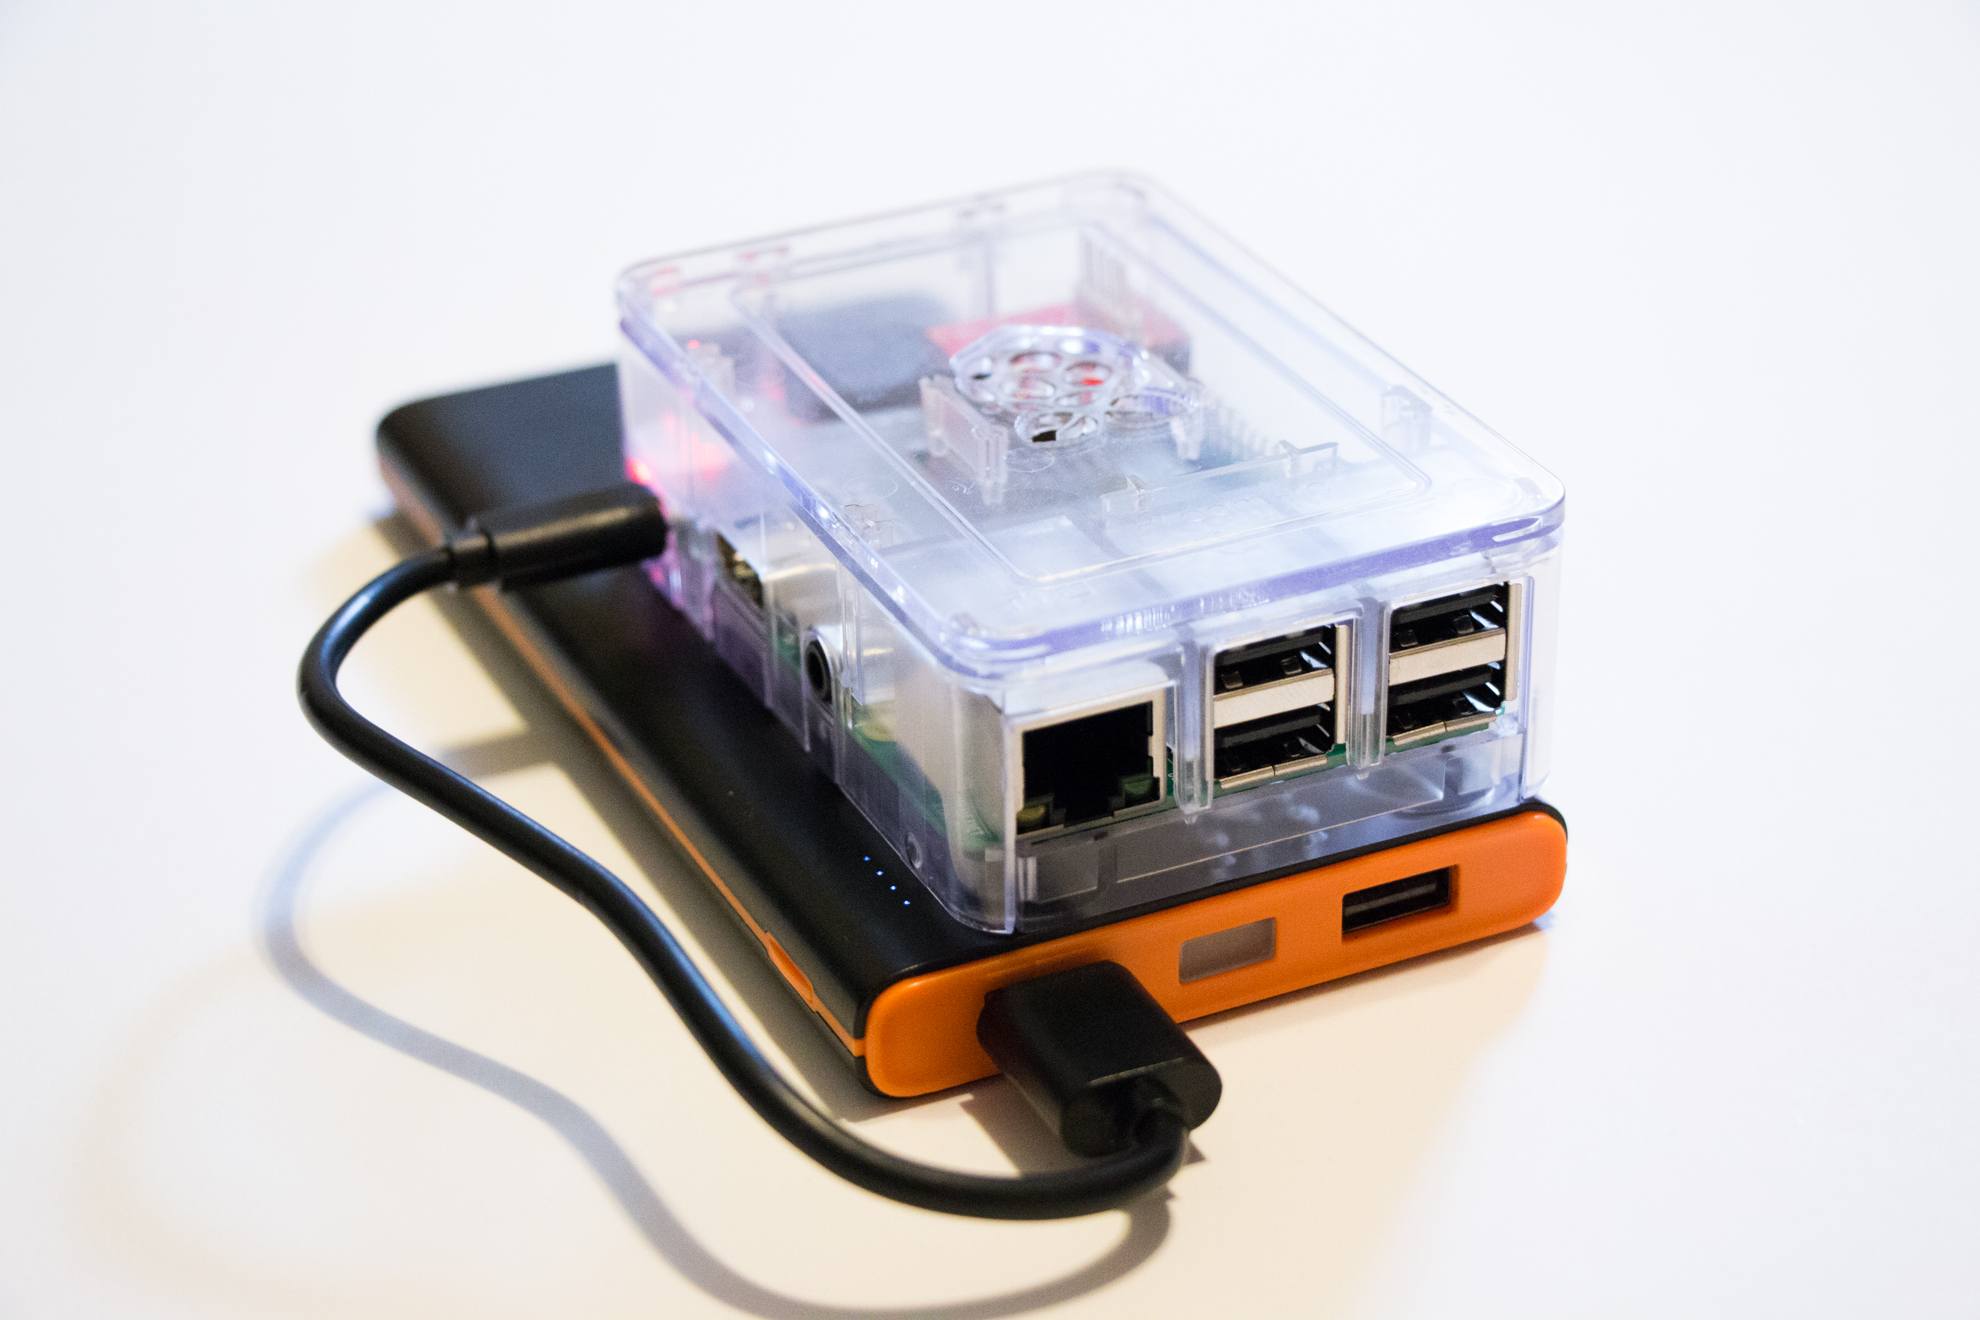 Raspberry Pi in a clear case, connected to an orange battery bank